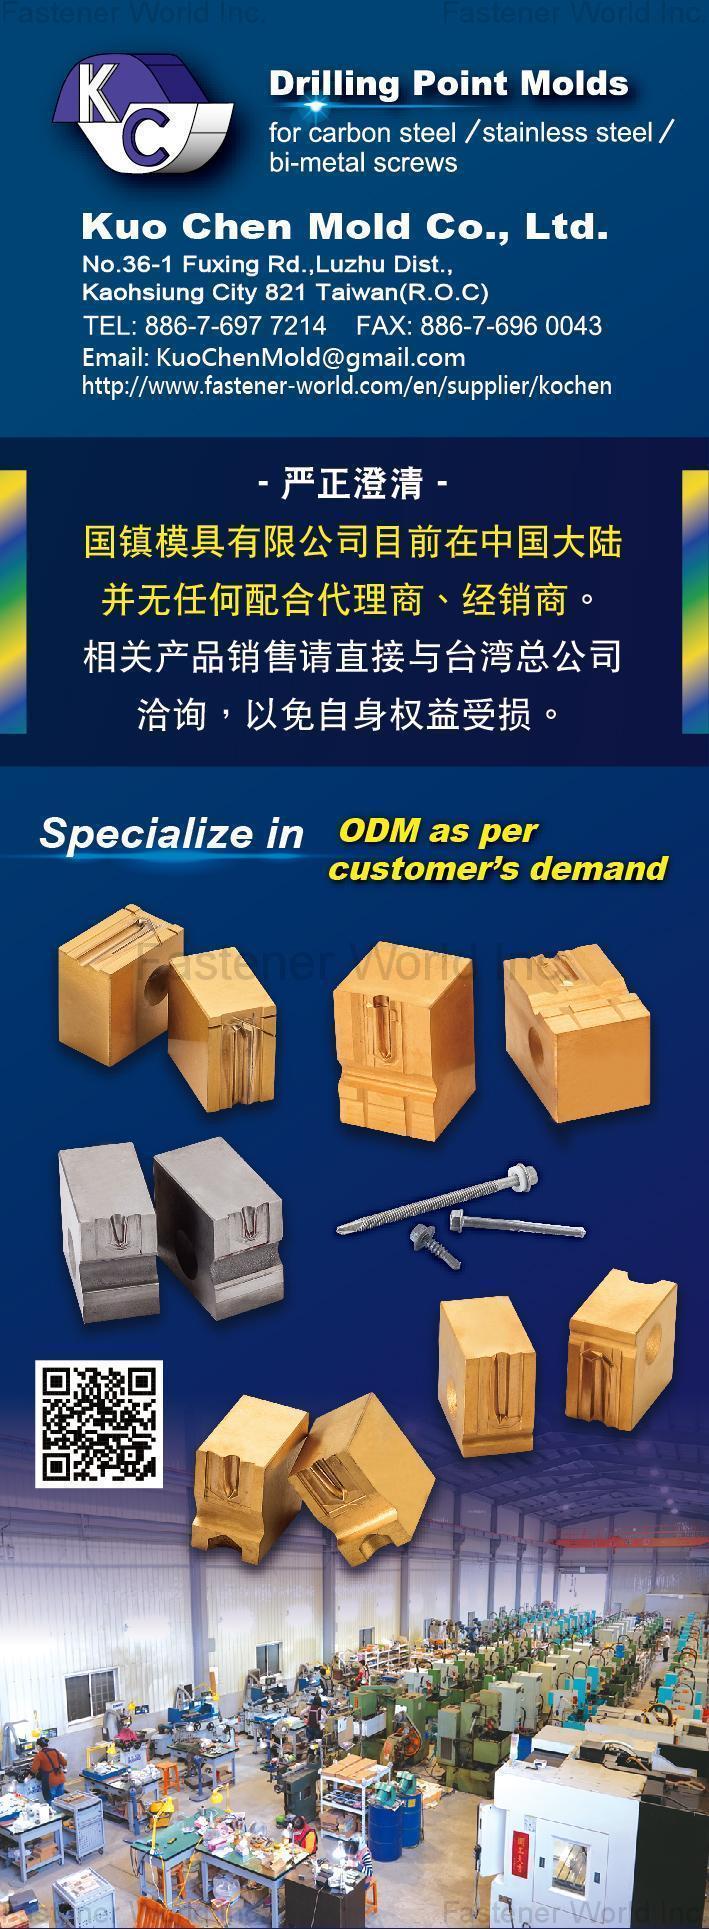 KUO CHEN MOLD CO., LTD. , Drilling Point Molds